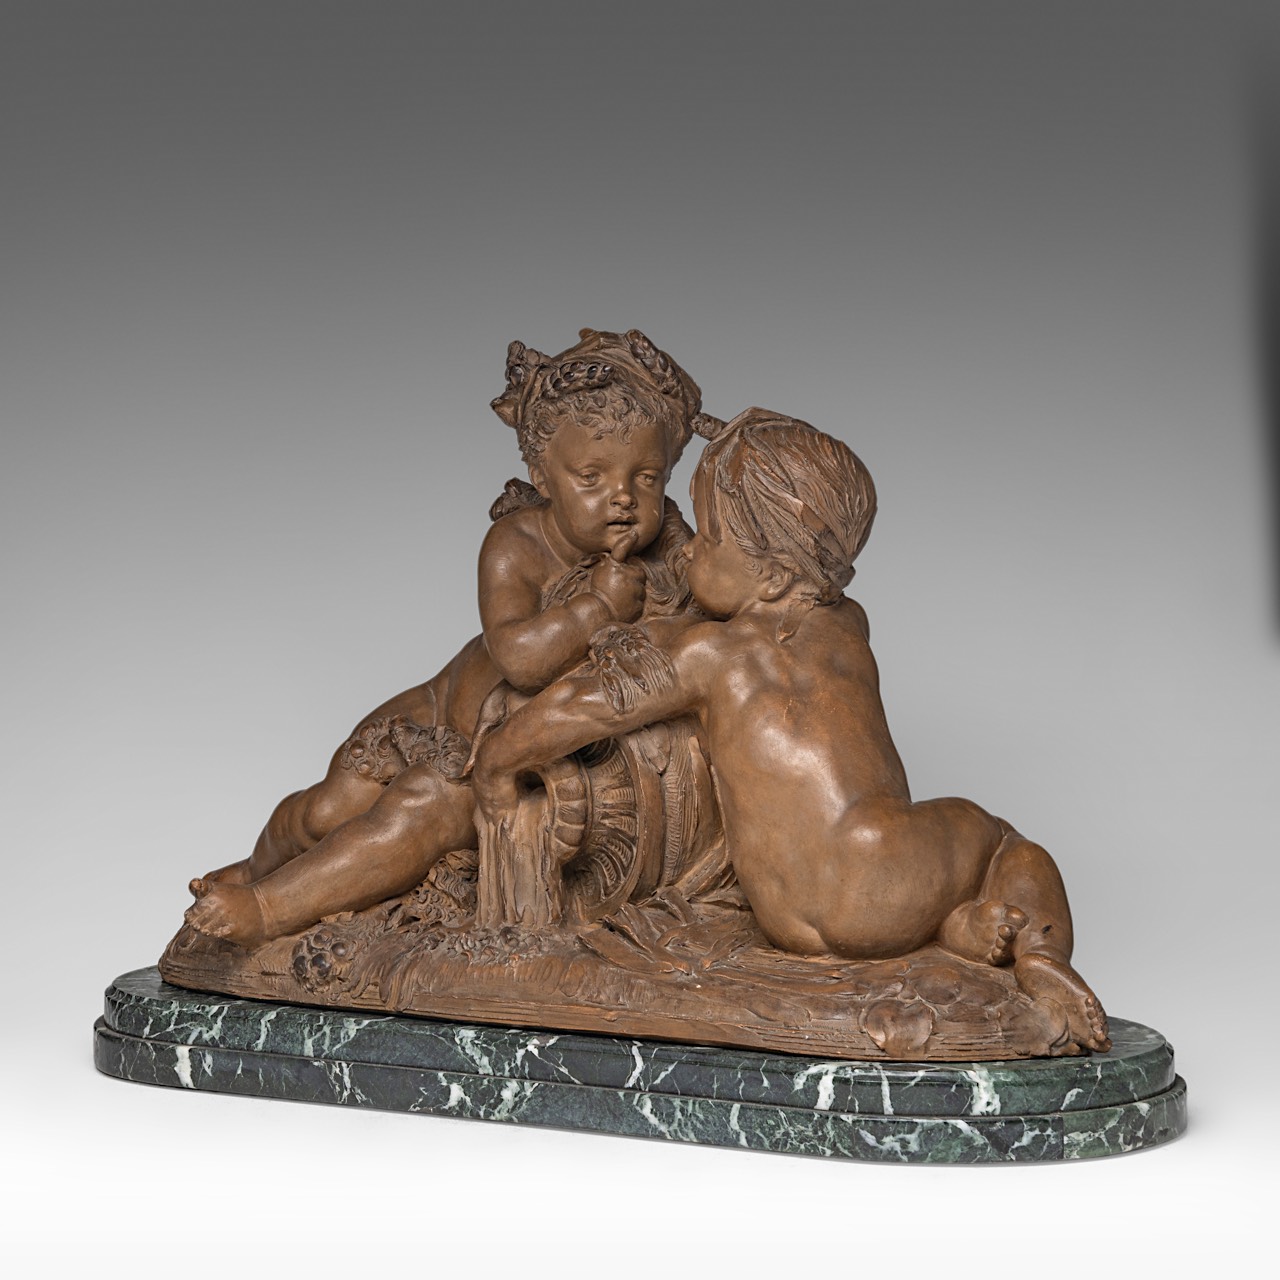 Carrier-Belleuse (1824-1887), two putti by the fountain, terracotta on a marble base, H 43 - W 68 cm - Bild 2 aus 10